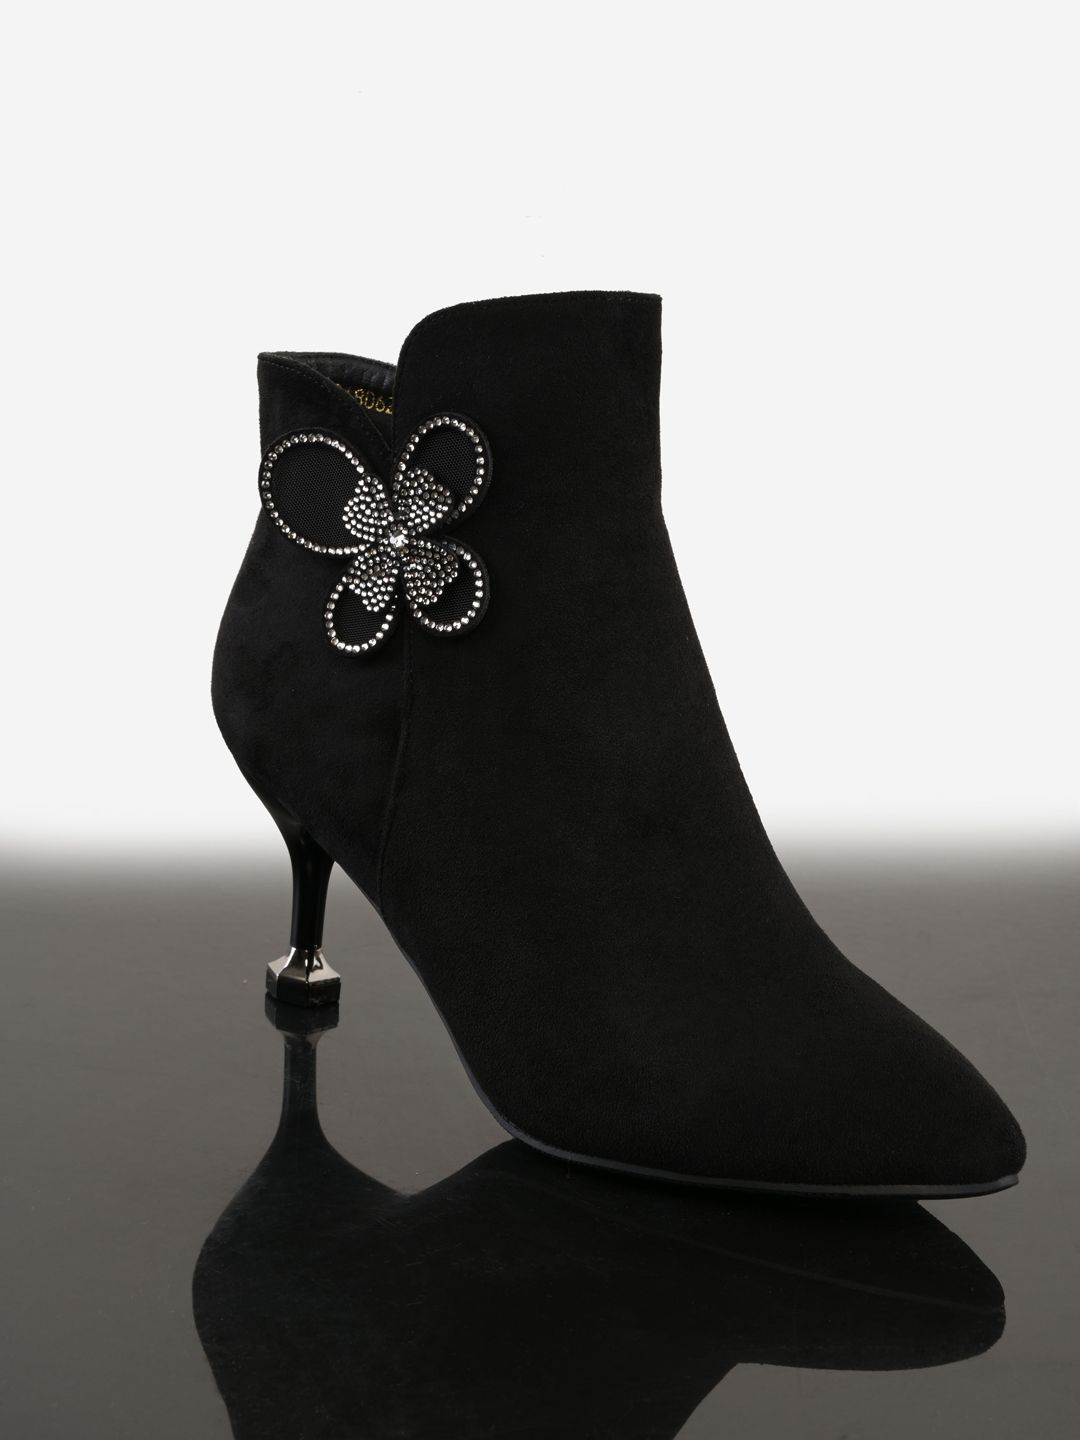 BuckleUp Black Block Heeled Boots with Bows Price in India